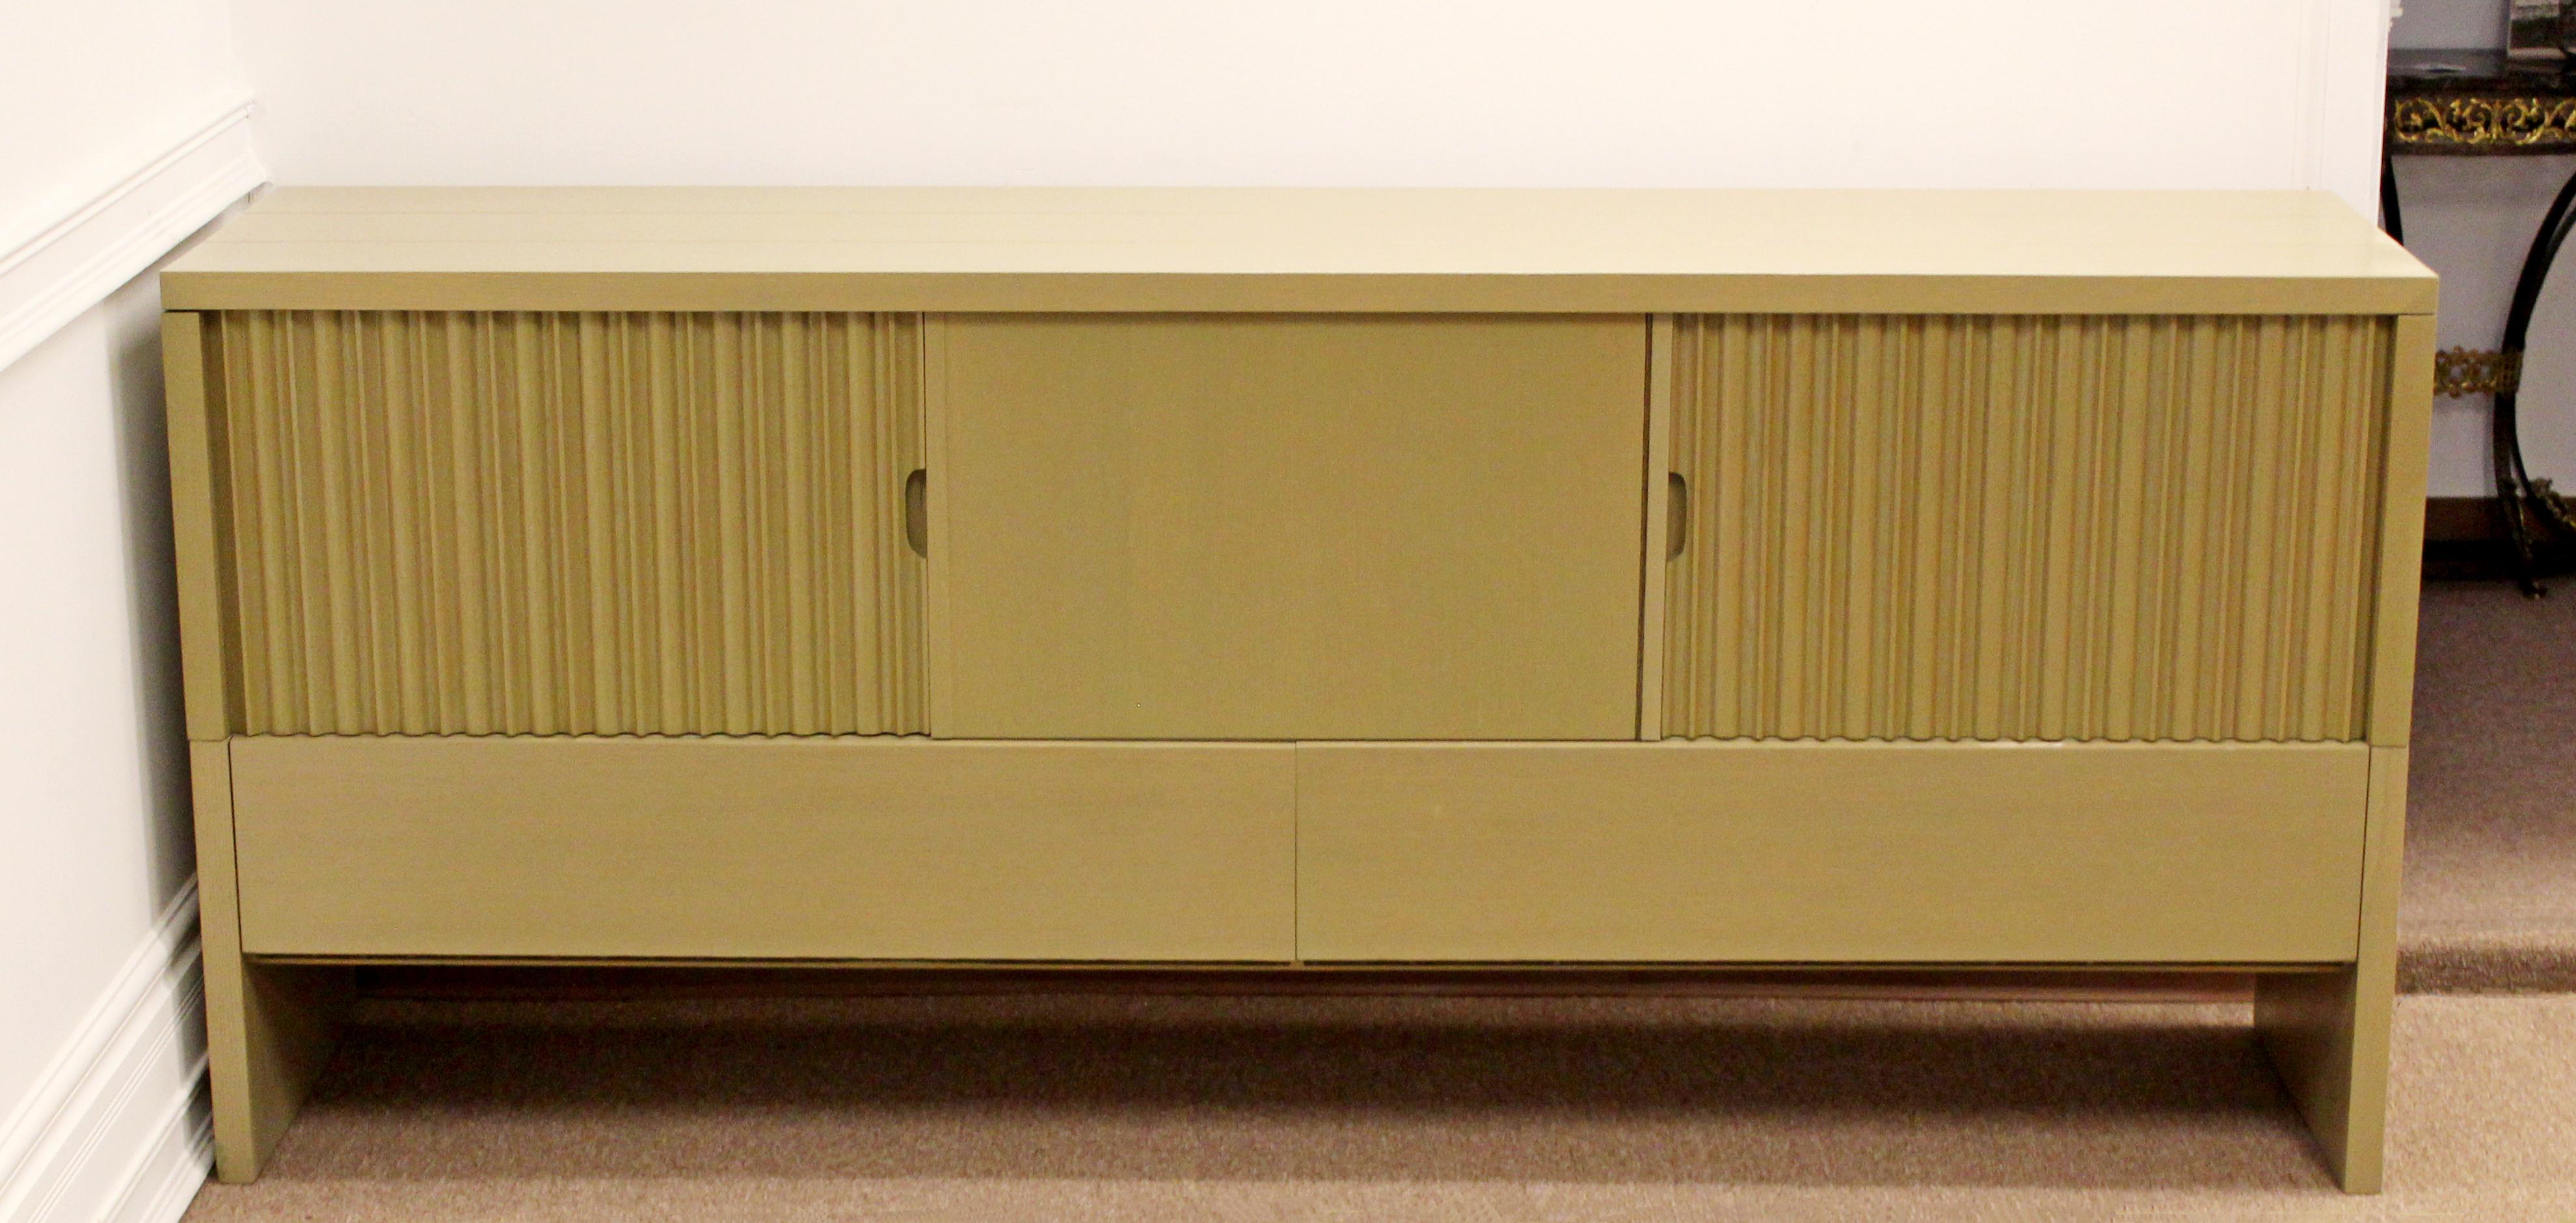 For your consideration is a magnificent credenza, with many storage openings and a butterfly joinery a bow-tie design, designed by Harold Schwartz for Romweber, circa early 1950s. In very good vintage condition. The dimensions are 84.5